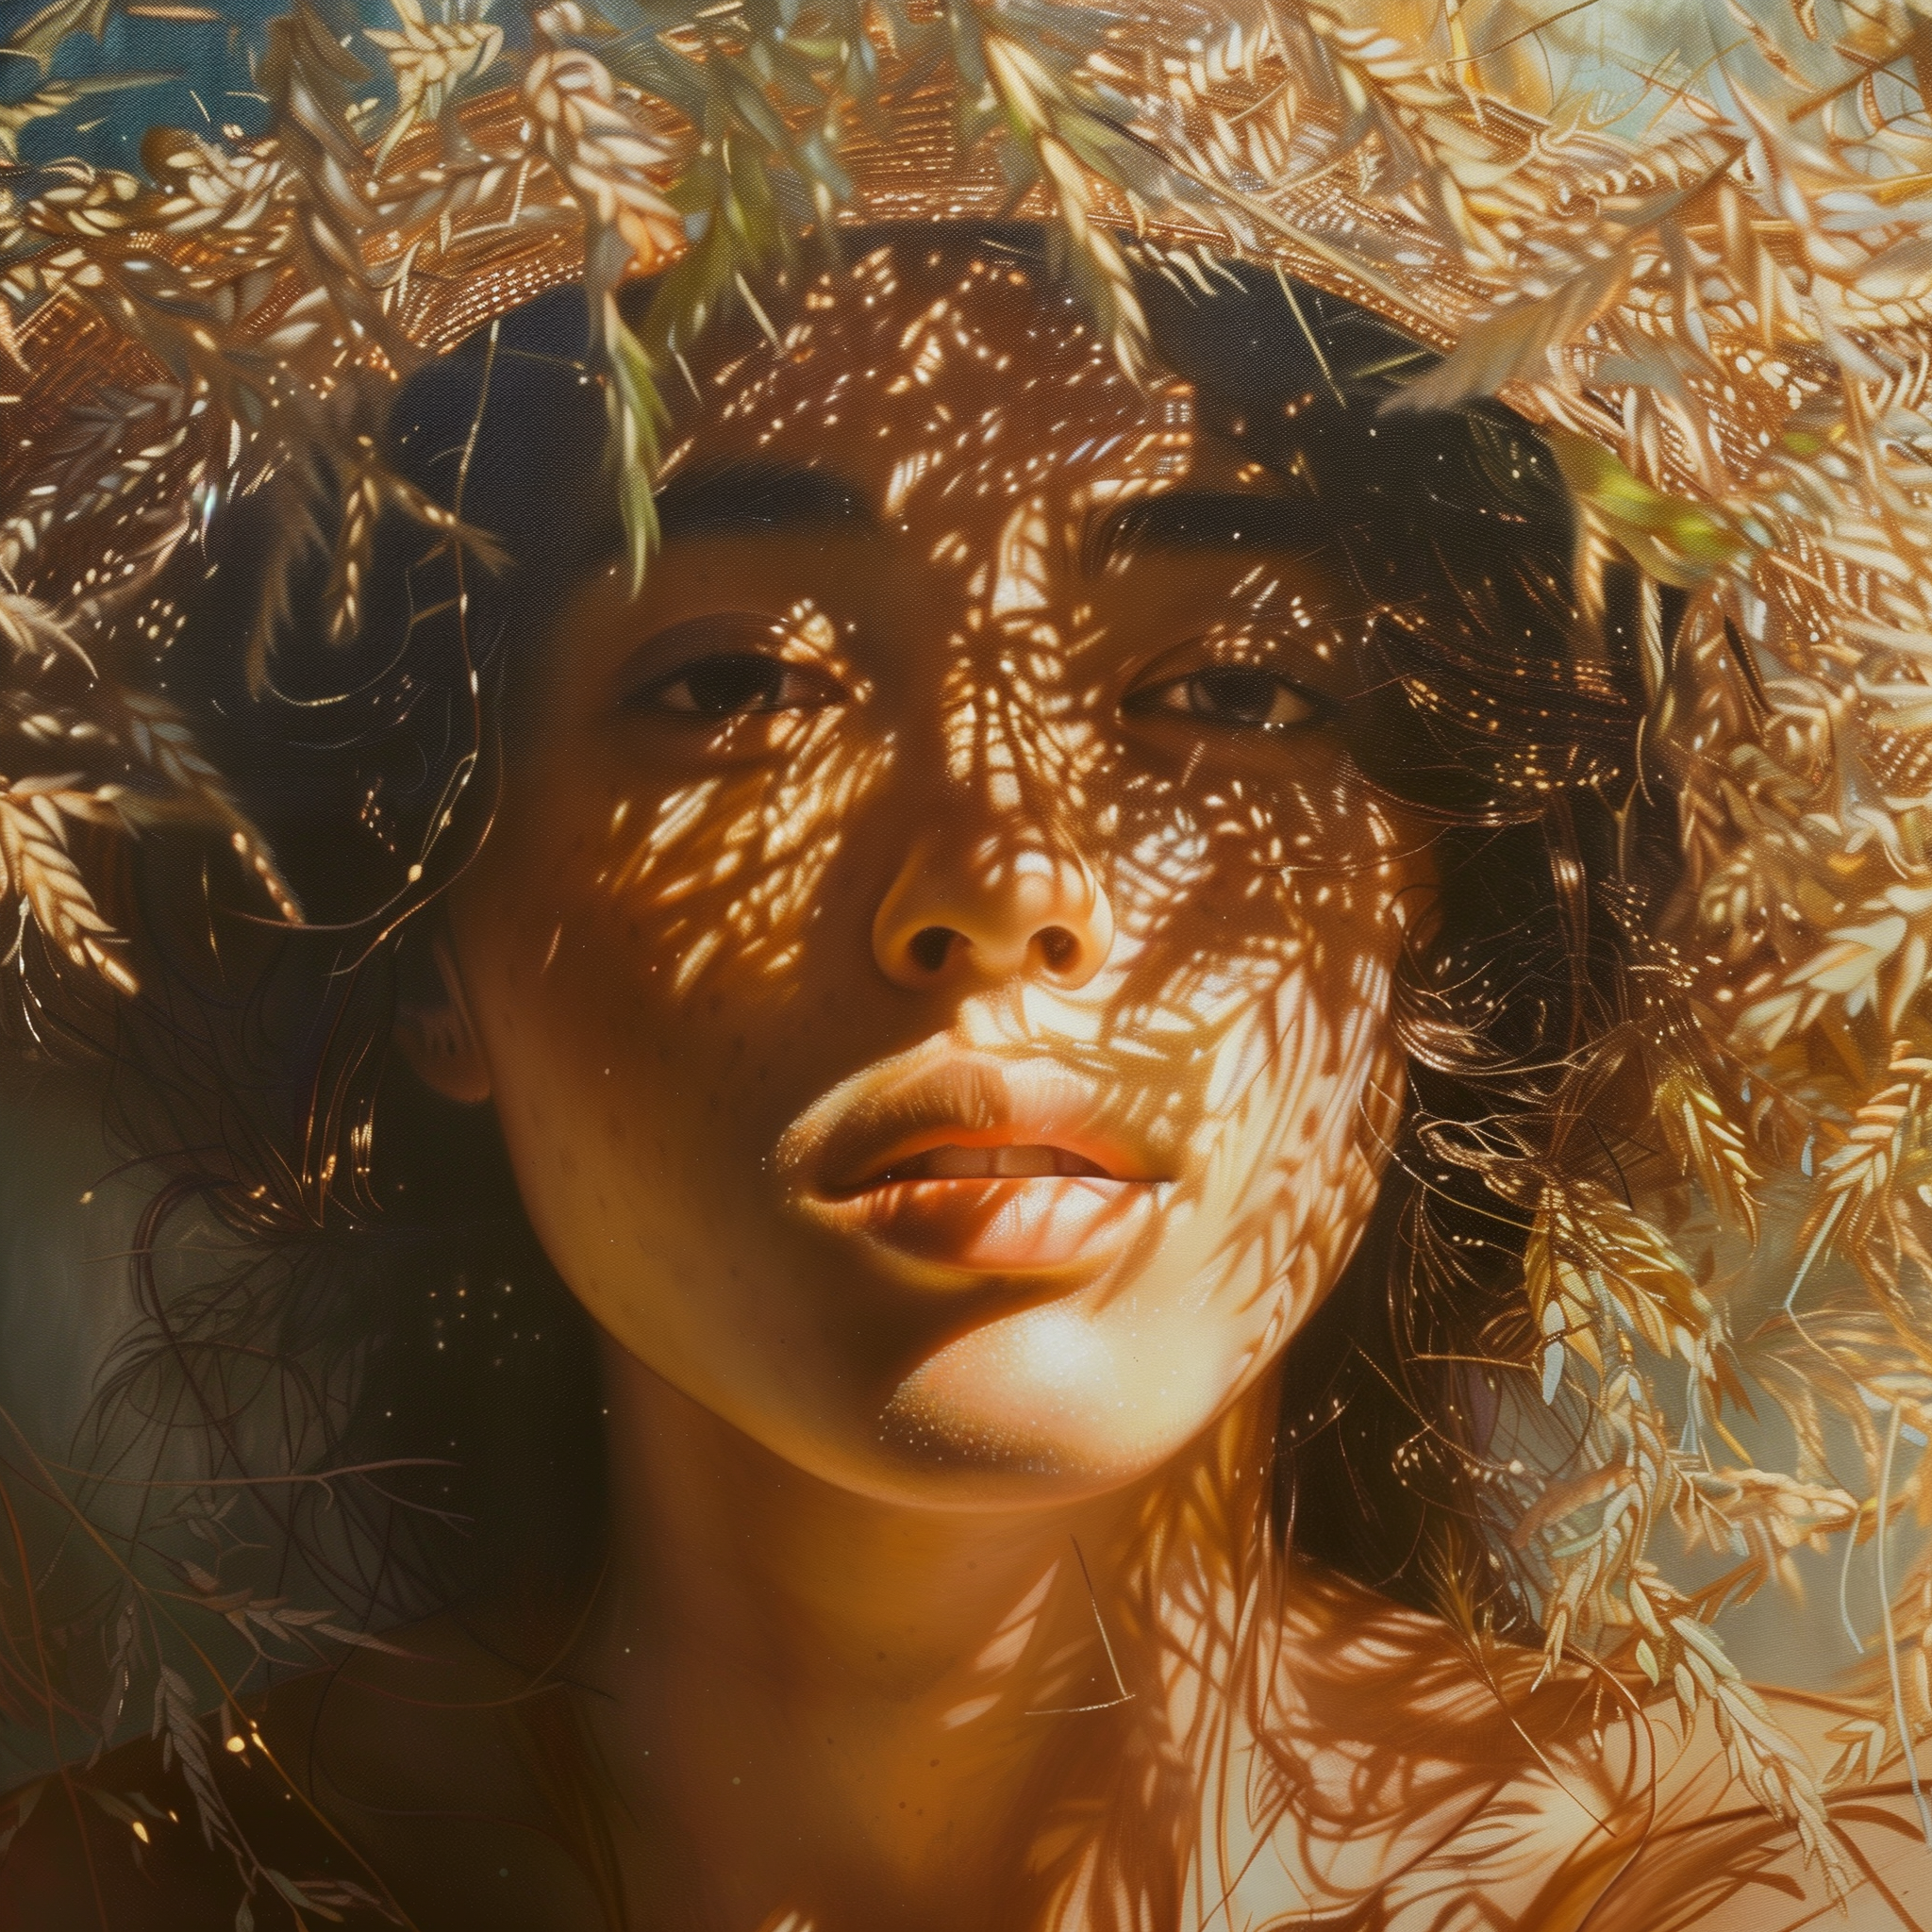 Avatar of a woman bathed in sunlight with a shadow of leaves on her face, depicting calm and serenity.